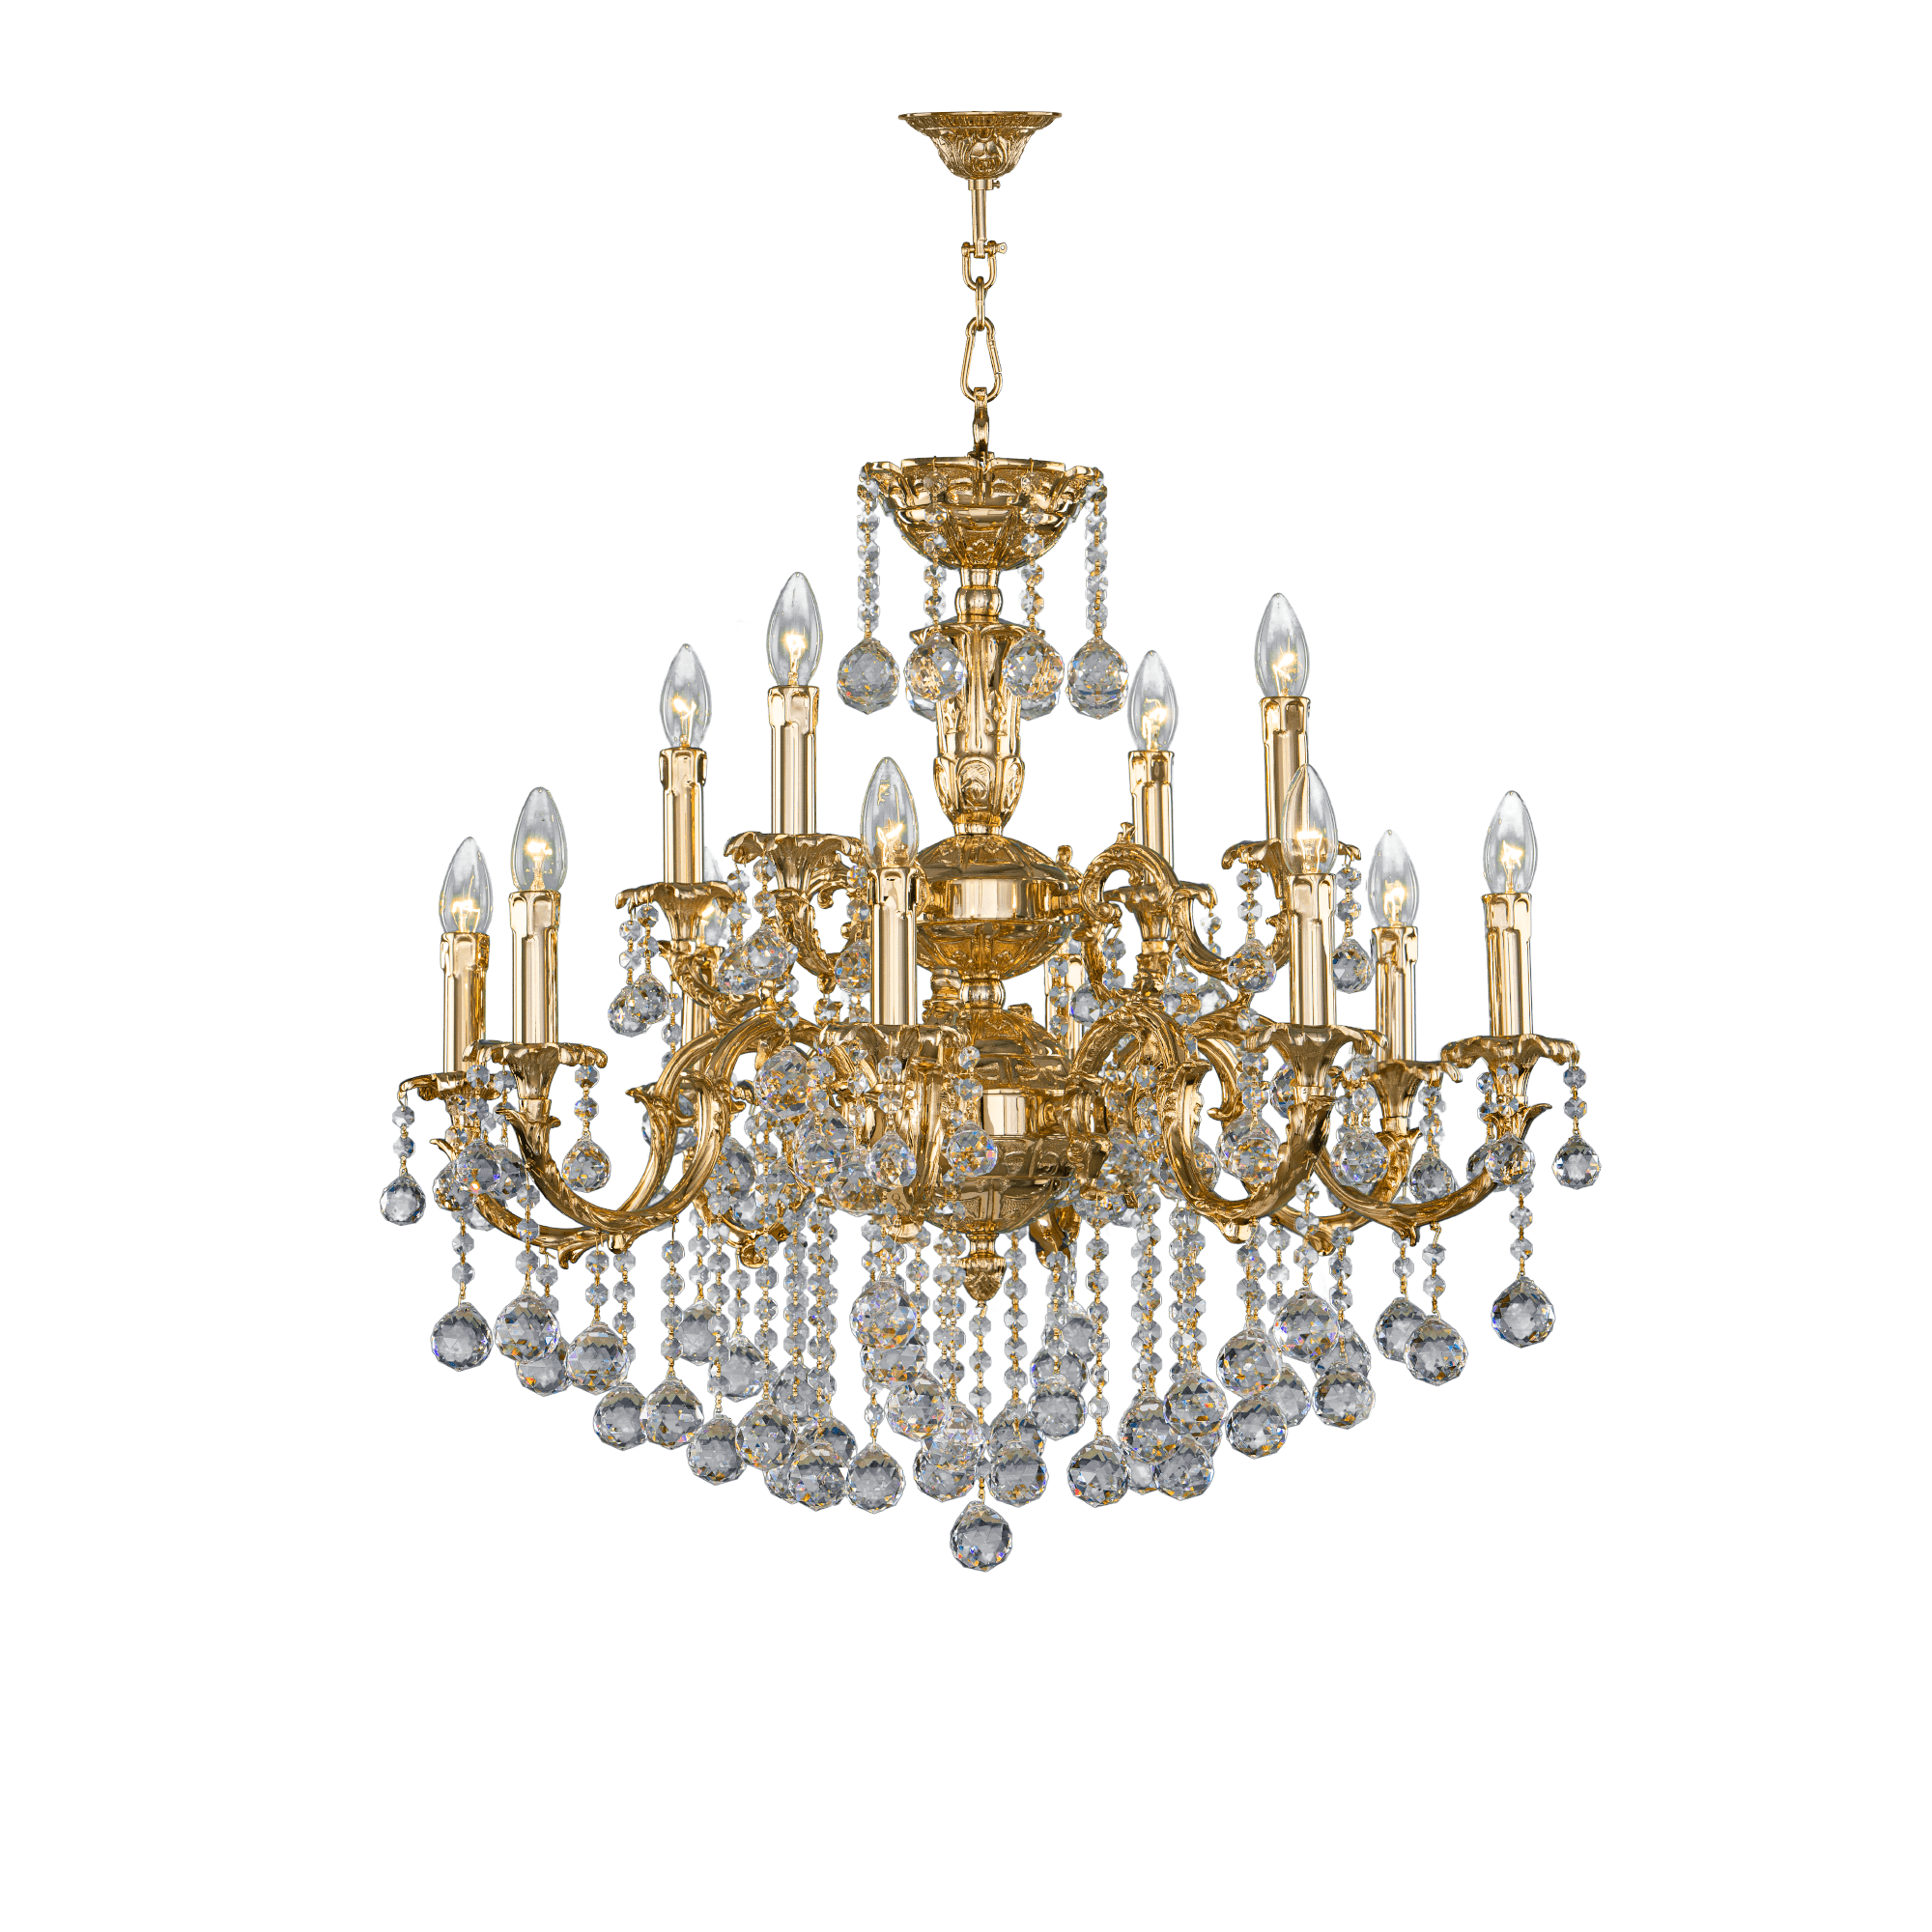 Asfour-Crystal-Lighting-Brass-Collection-Brass-Chandelier-12-Bulbs-Gold